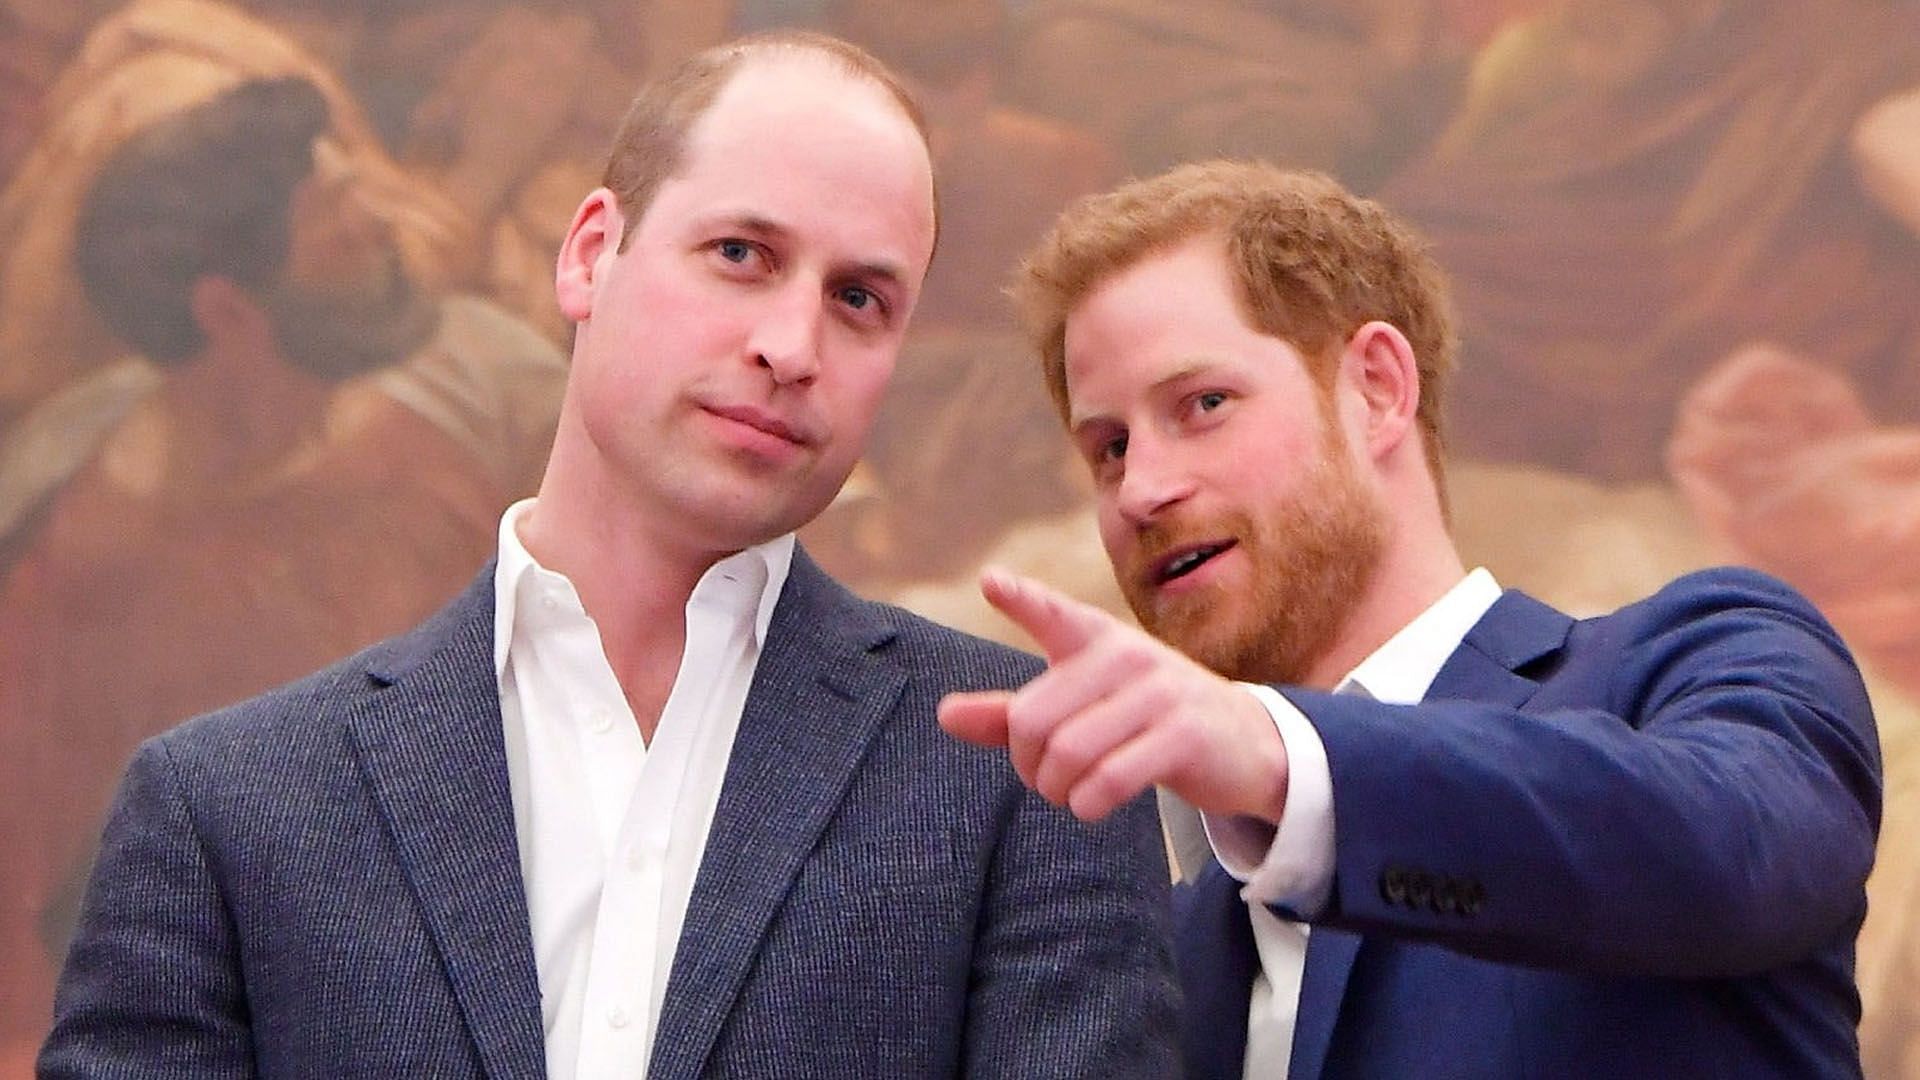 Experts from Prince Harry